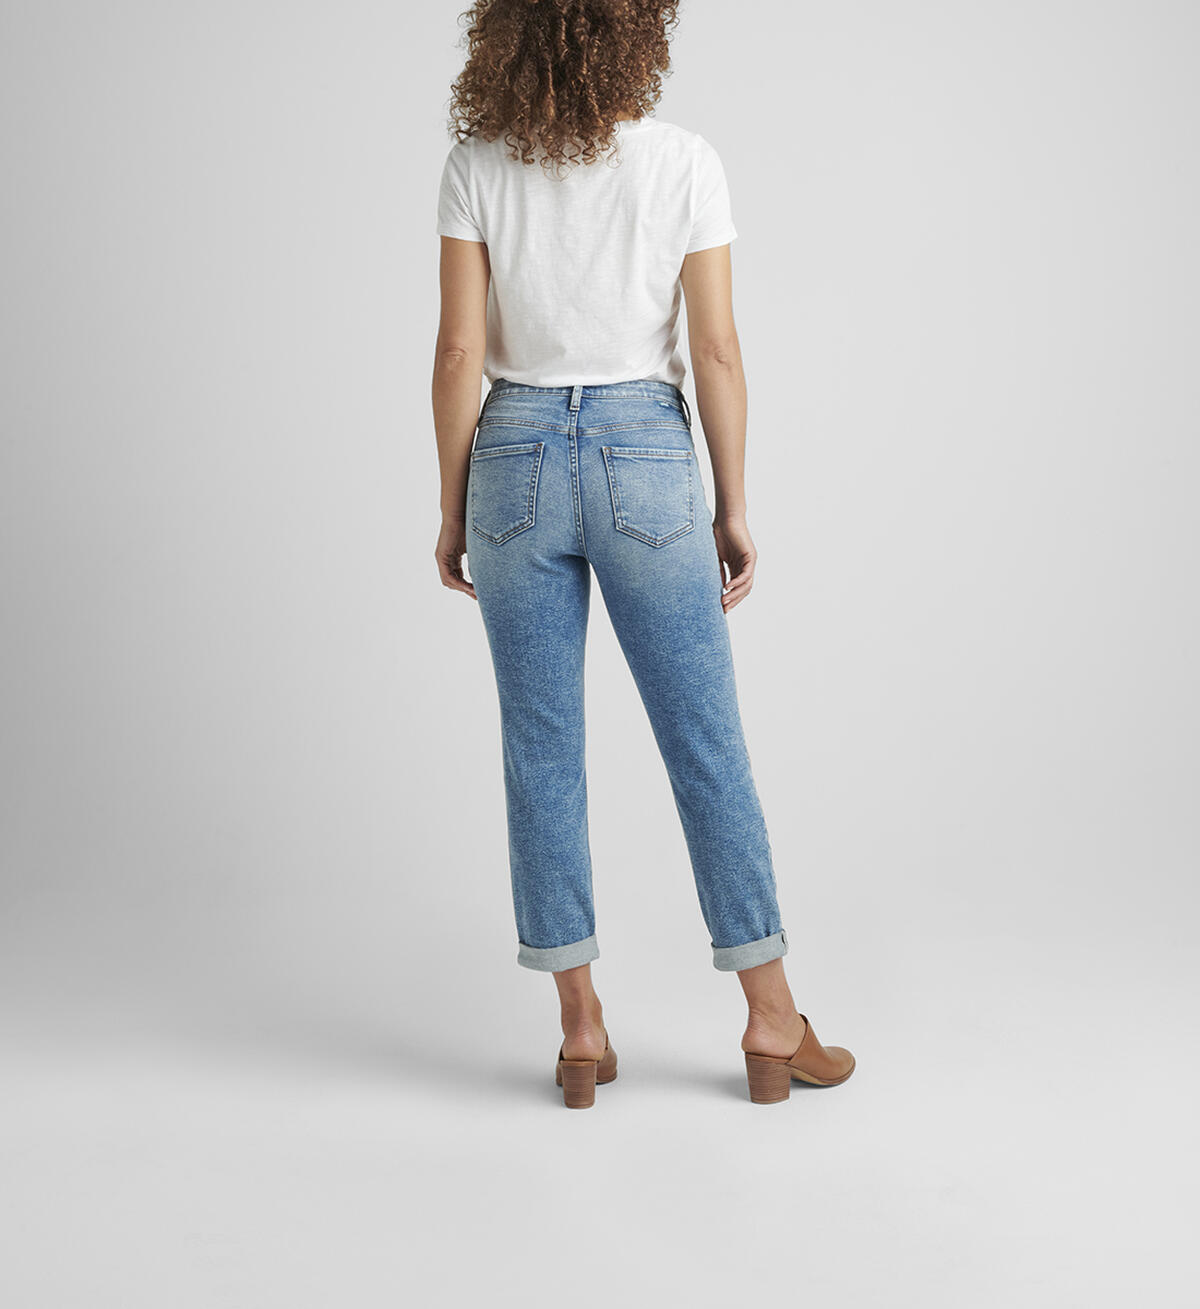 Buy Carter Mid Rise Girlfriend Jeans for USD 74.00 | Jag Jeans US New